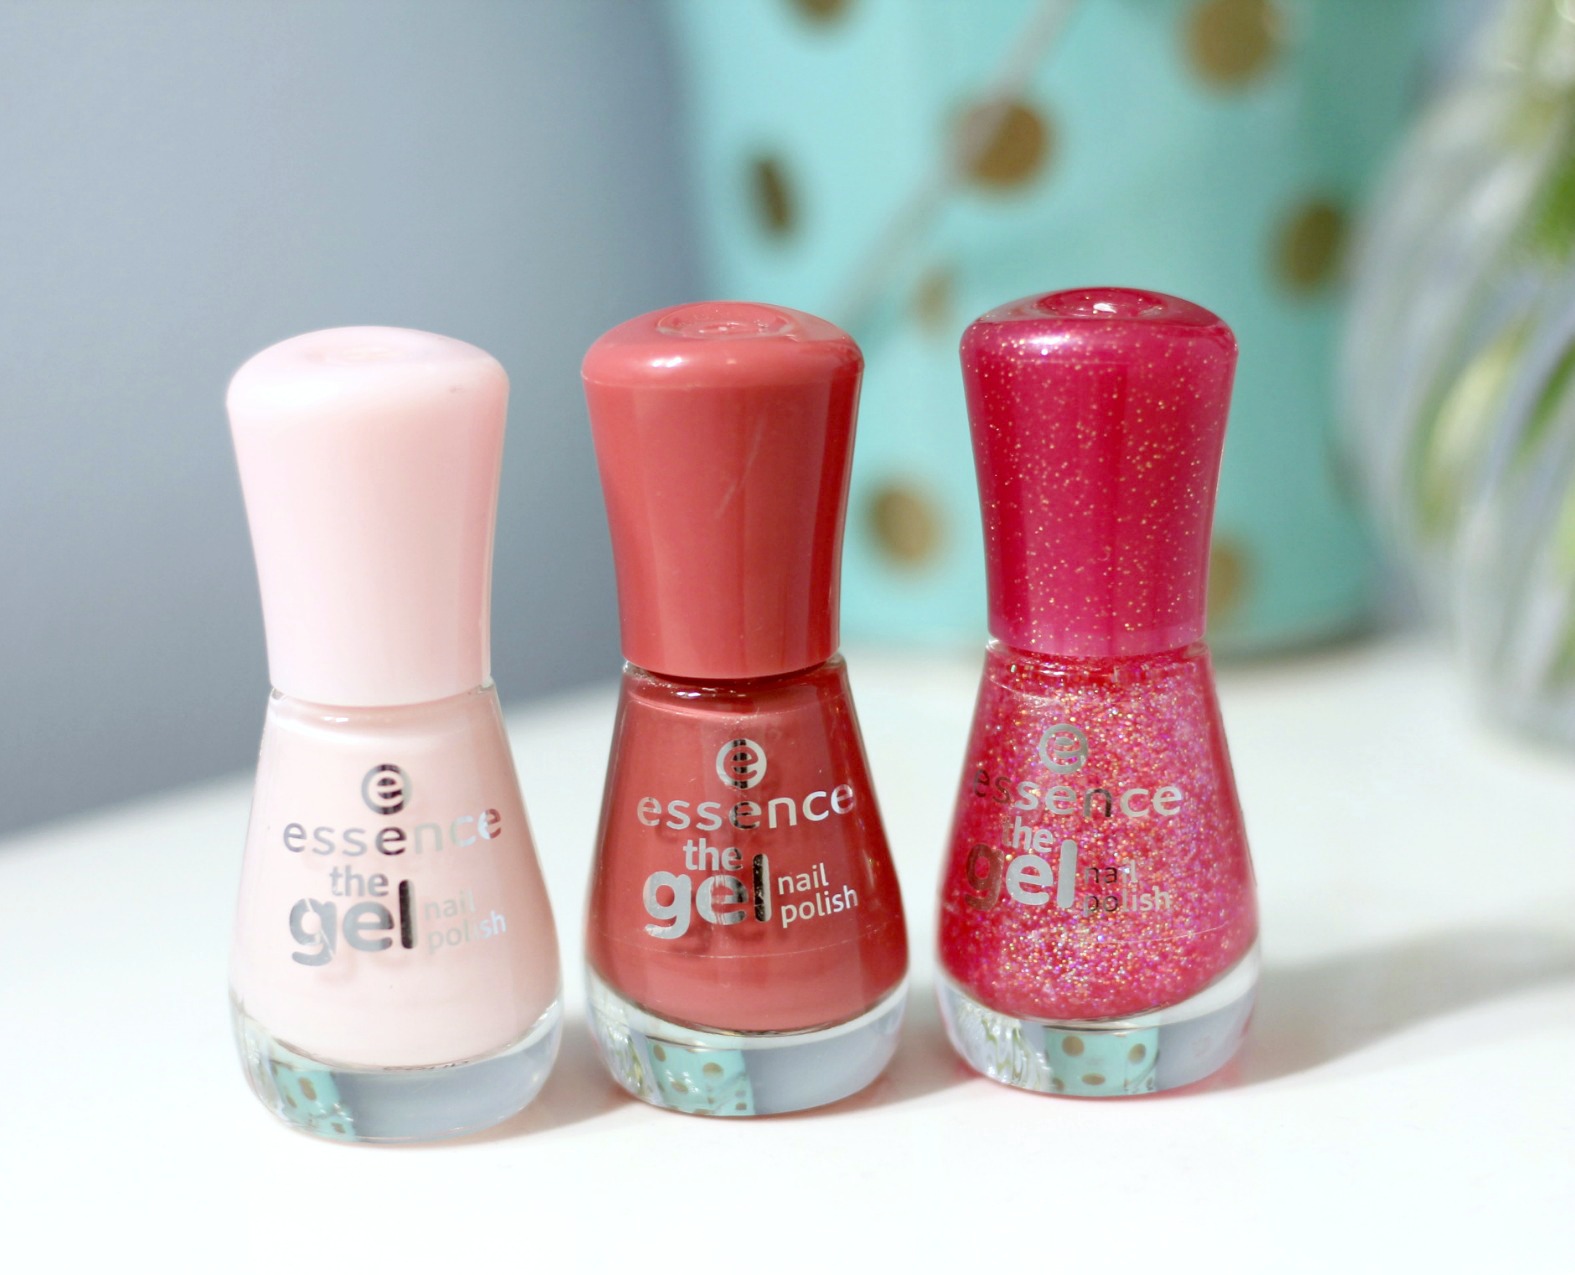 2. "Street Color" nail polish collection available for purchase - wide 6